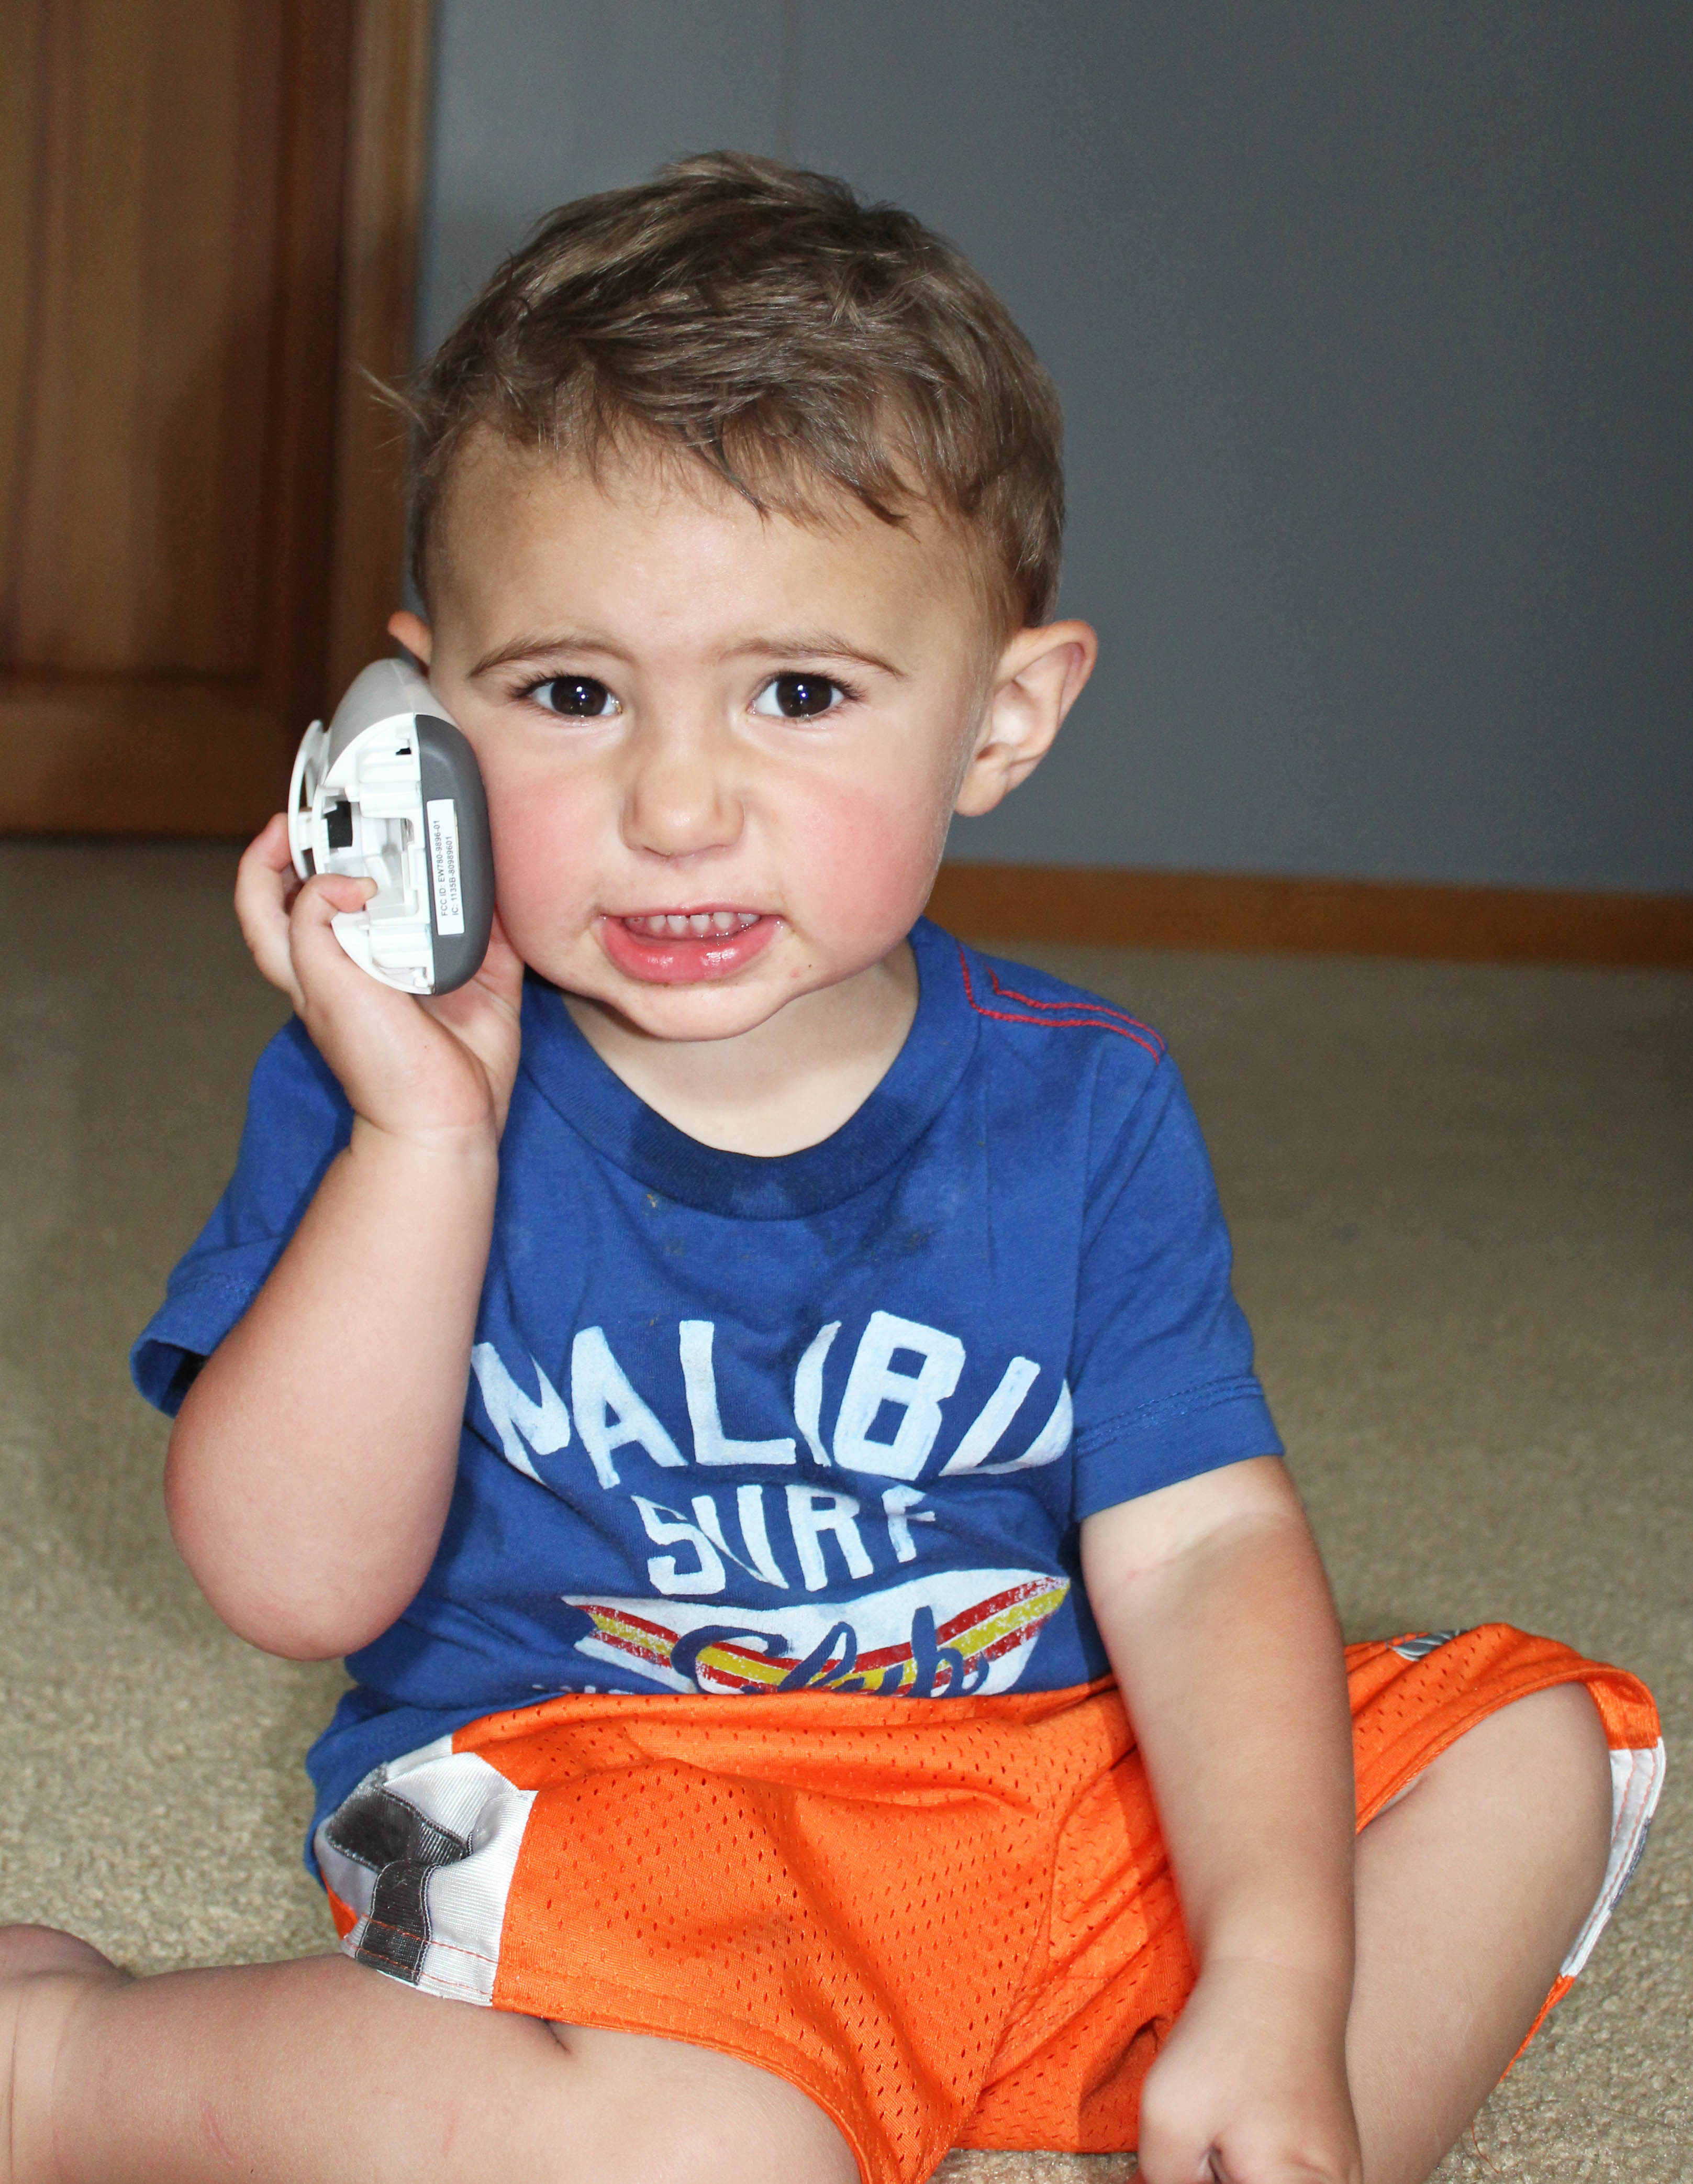 Creating a safe space for toddlers and sleepwalking children #VTechBaby #ad IsSheReally.com